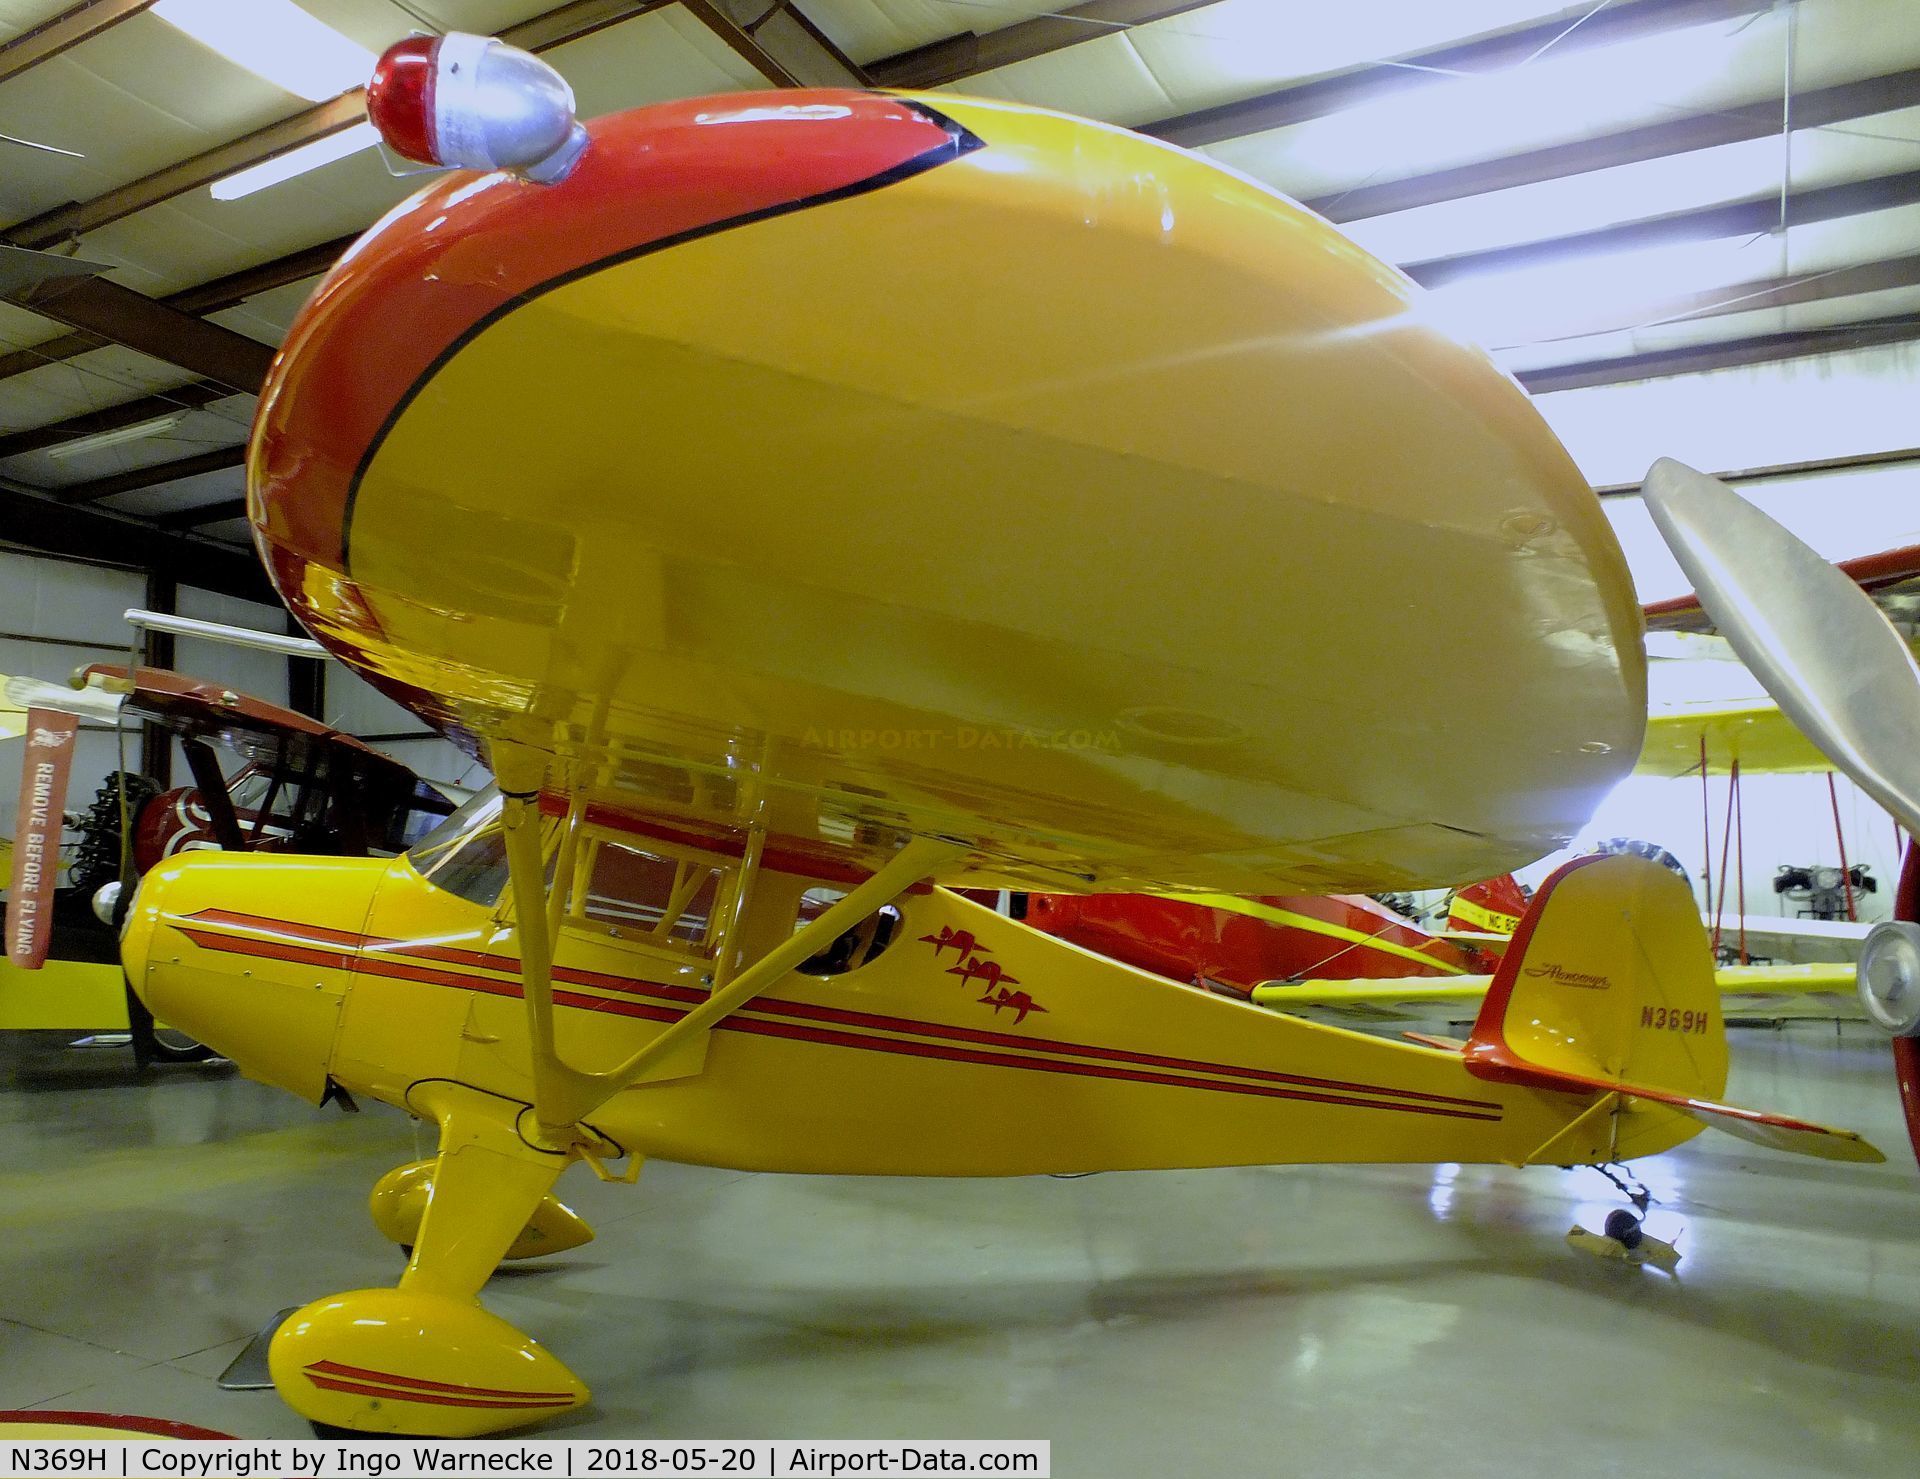 N369H, 1948 Monocoupe 90AL-115 C/N 863, Monocoupe 90 AL-115 at the Aircraft Restoration Museum at Creve Coeur airfield, Maryland Heights MO